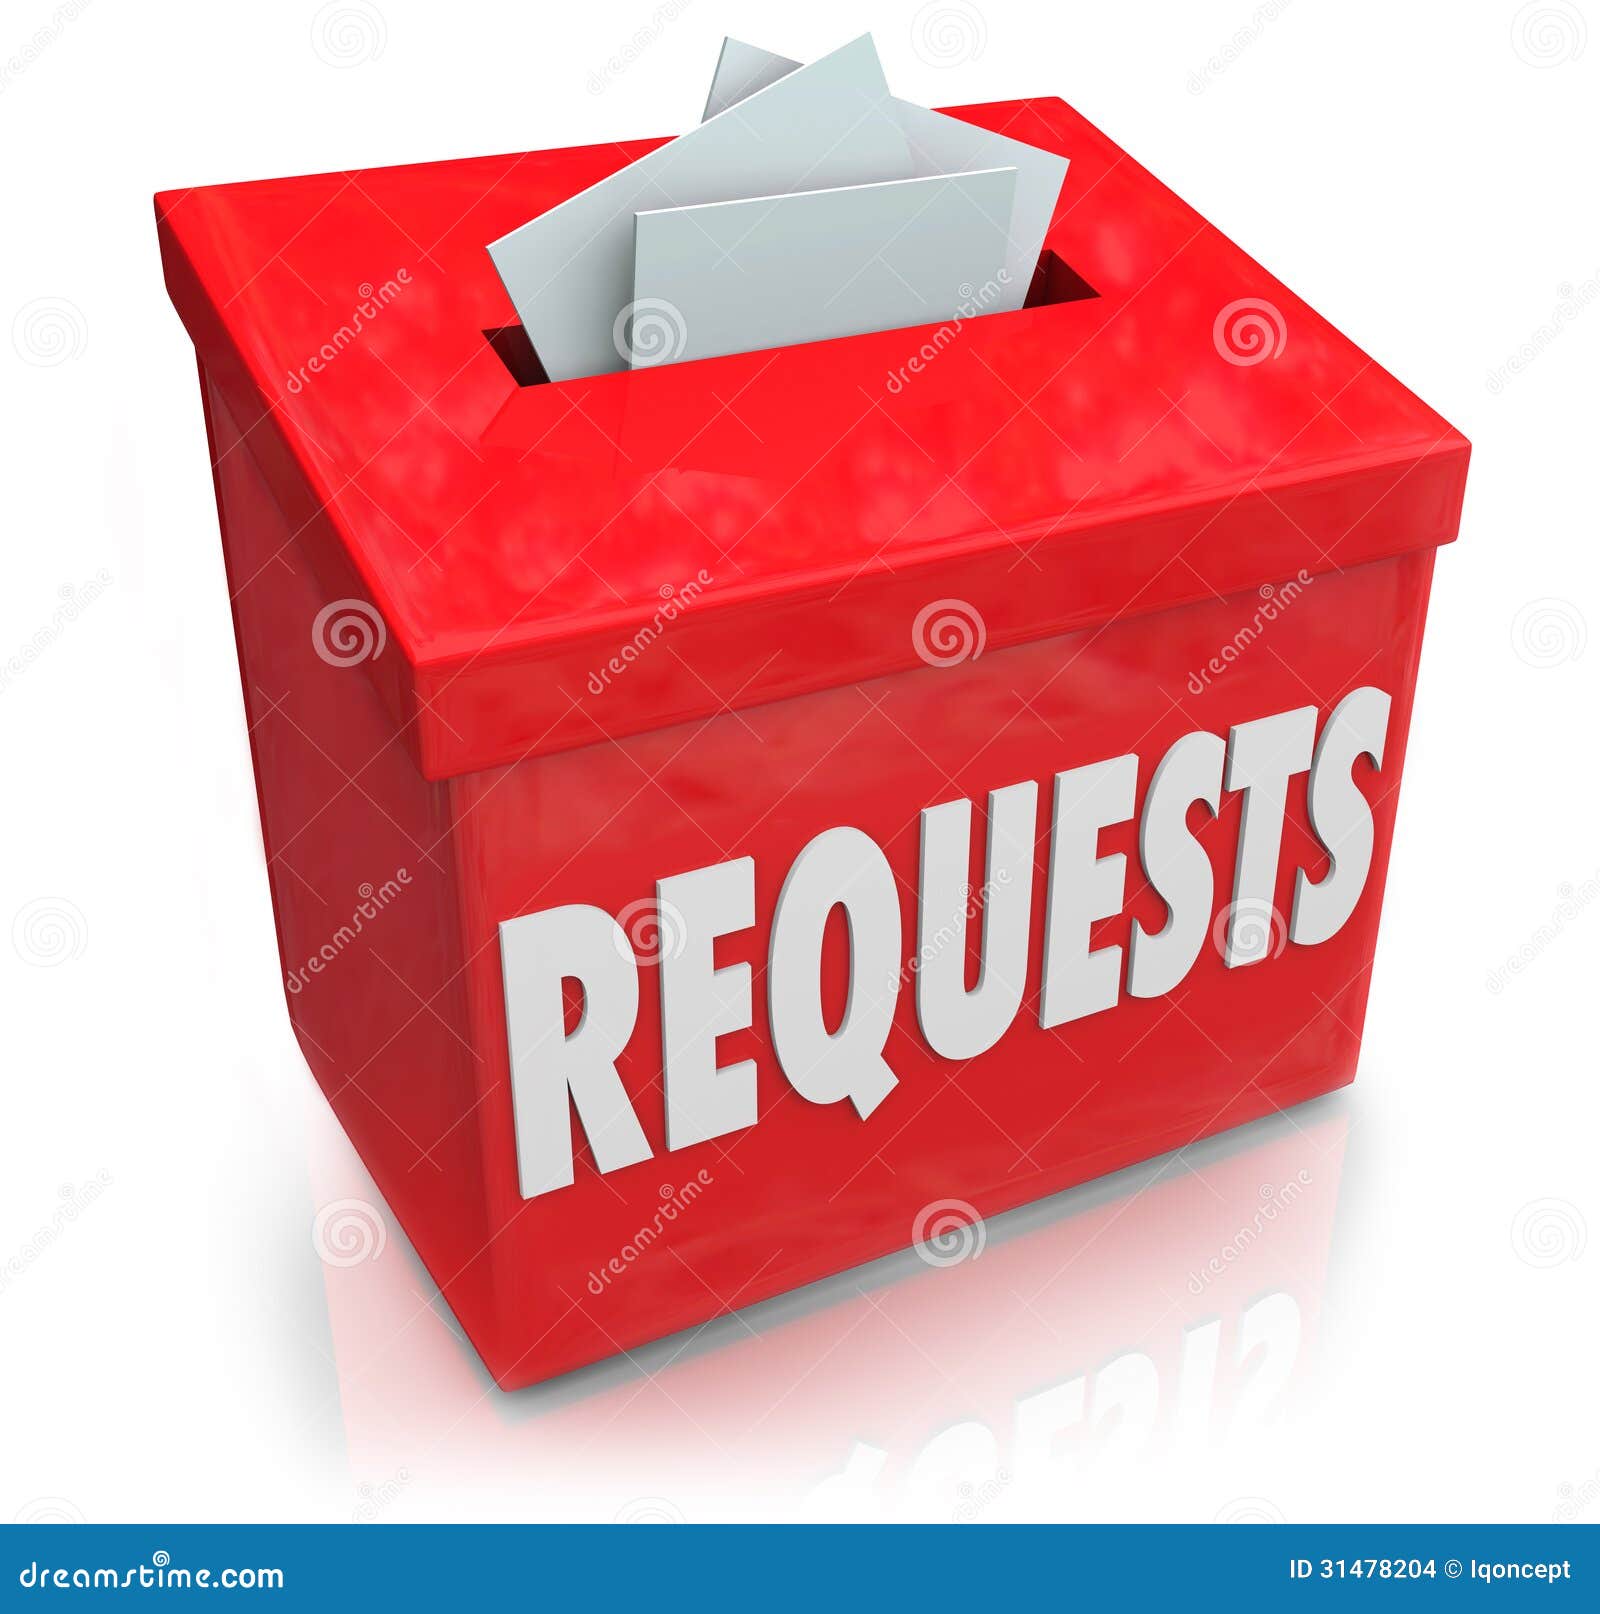 requests suggestion box wants desires submit ideas